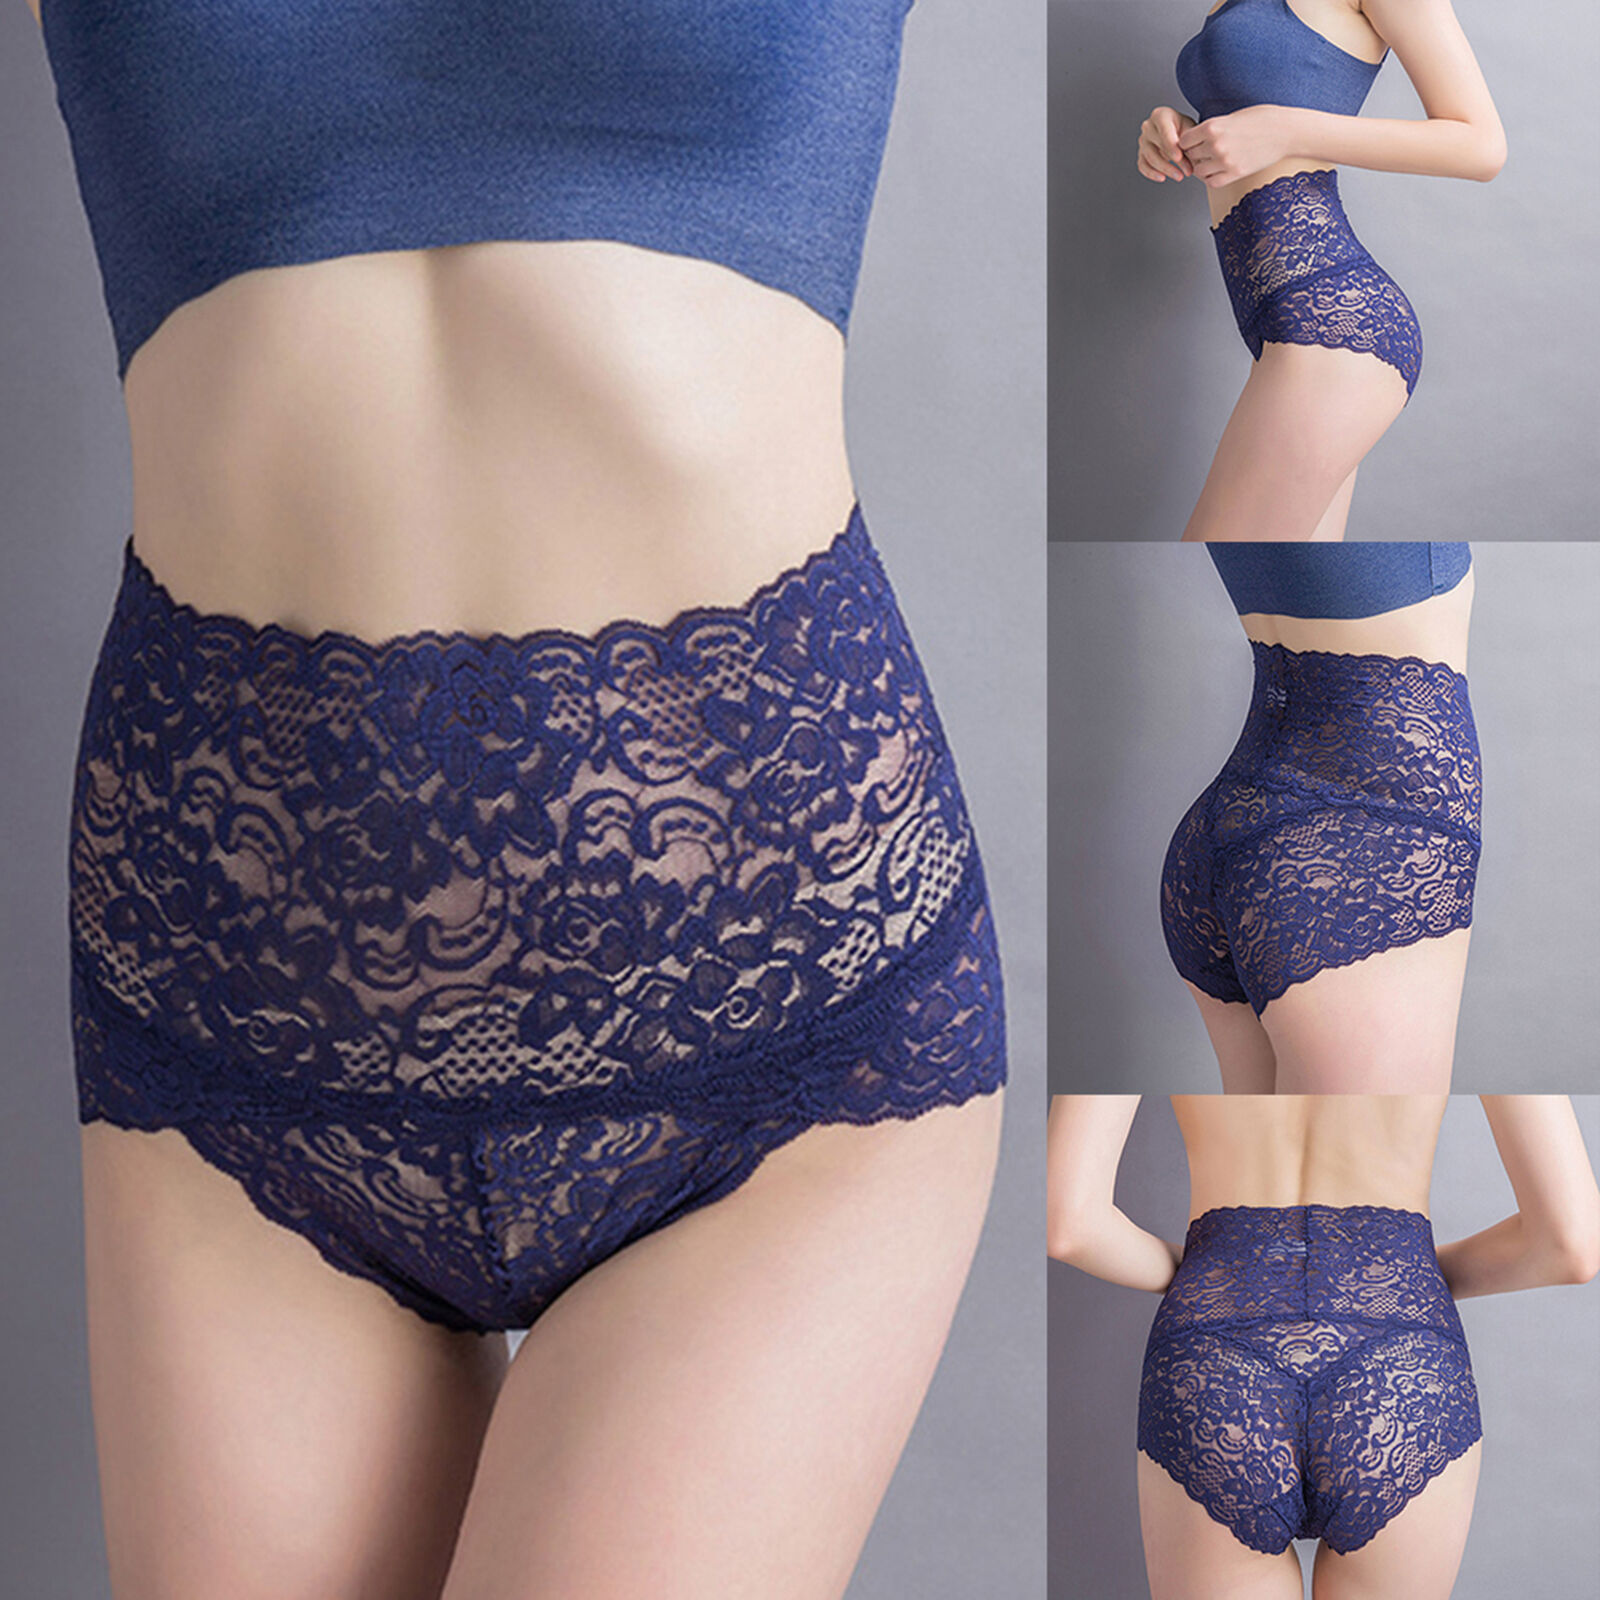 Women's Flexible High Waisted Lace panties